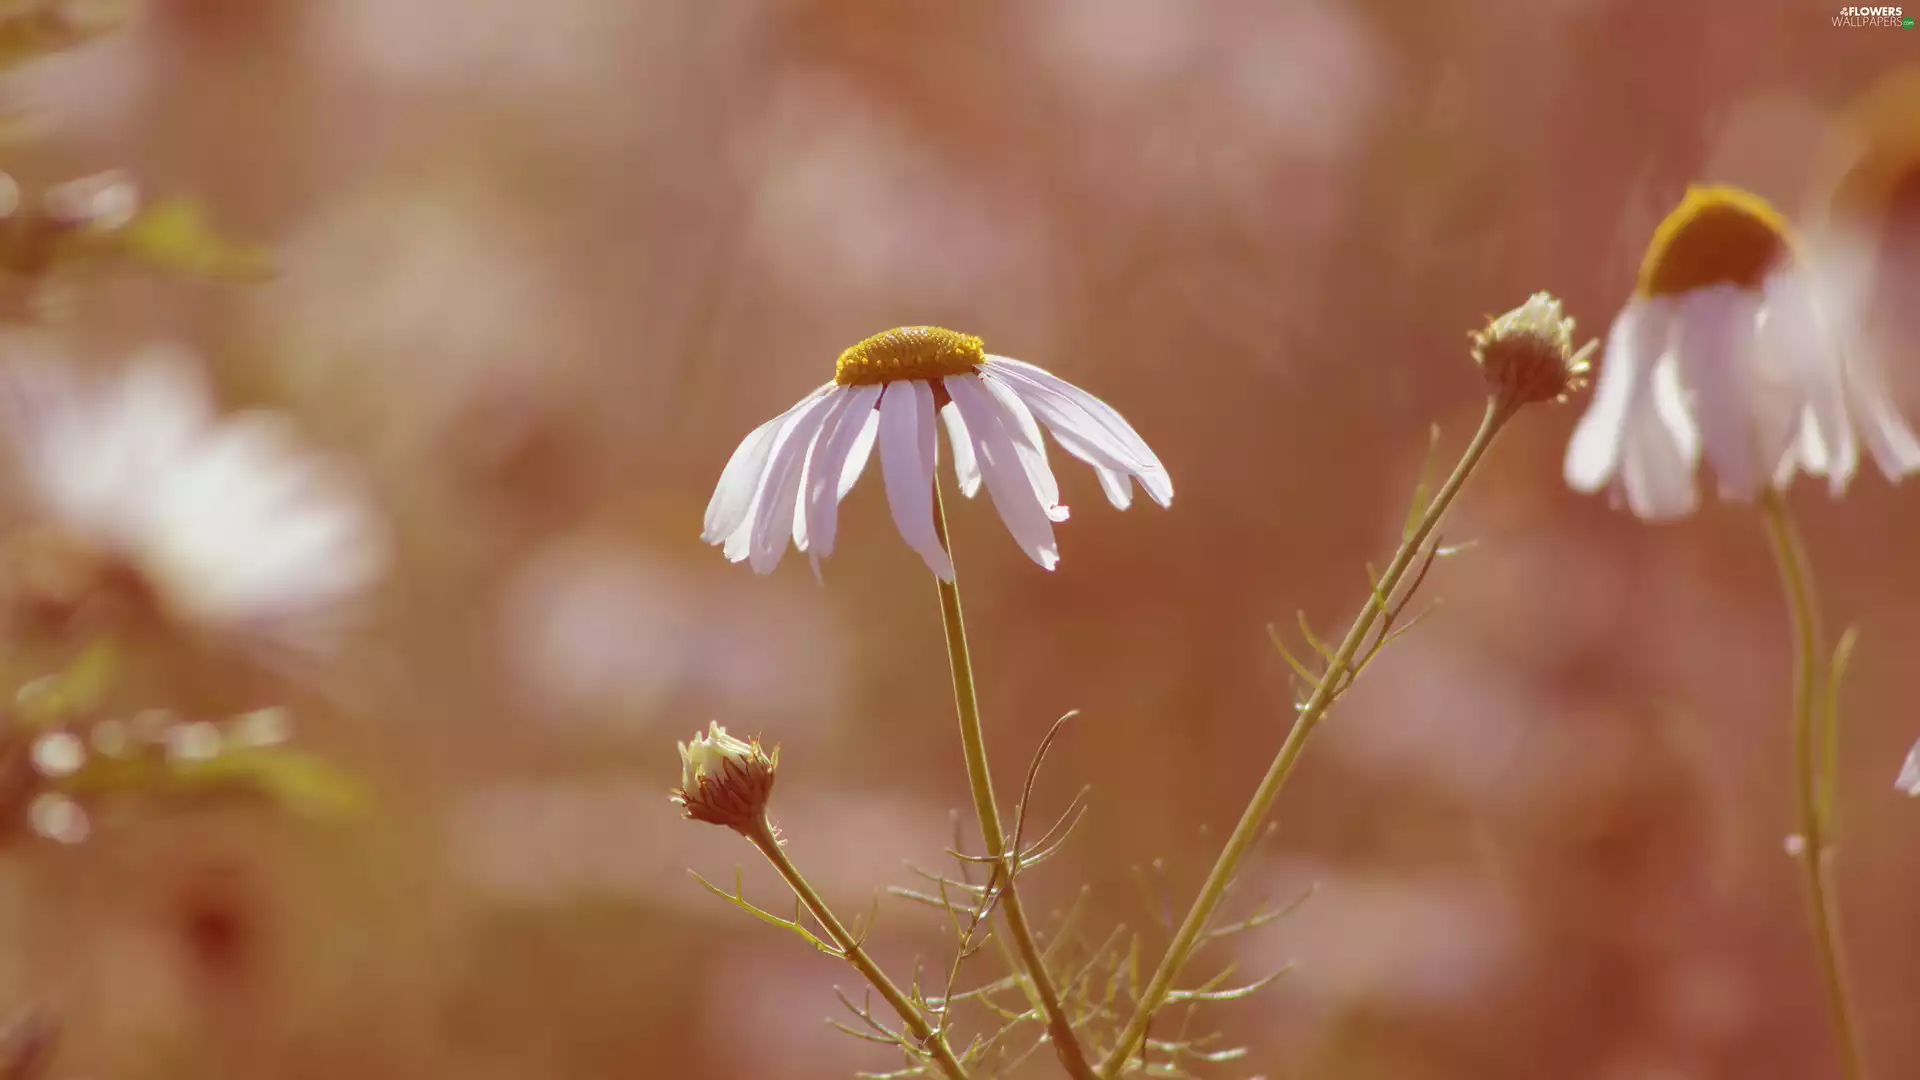 rapprochement, blurry background, chamomile, Buds, flower